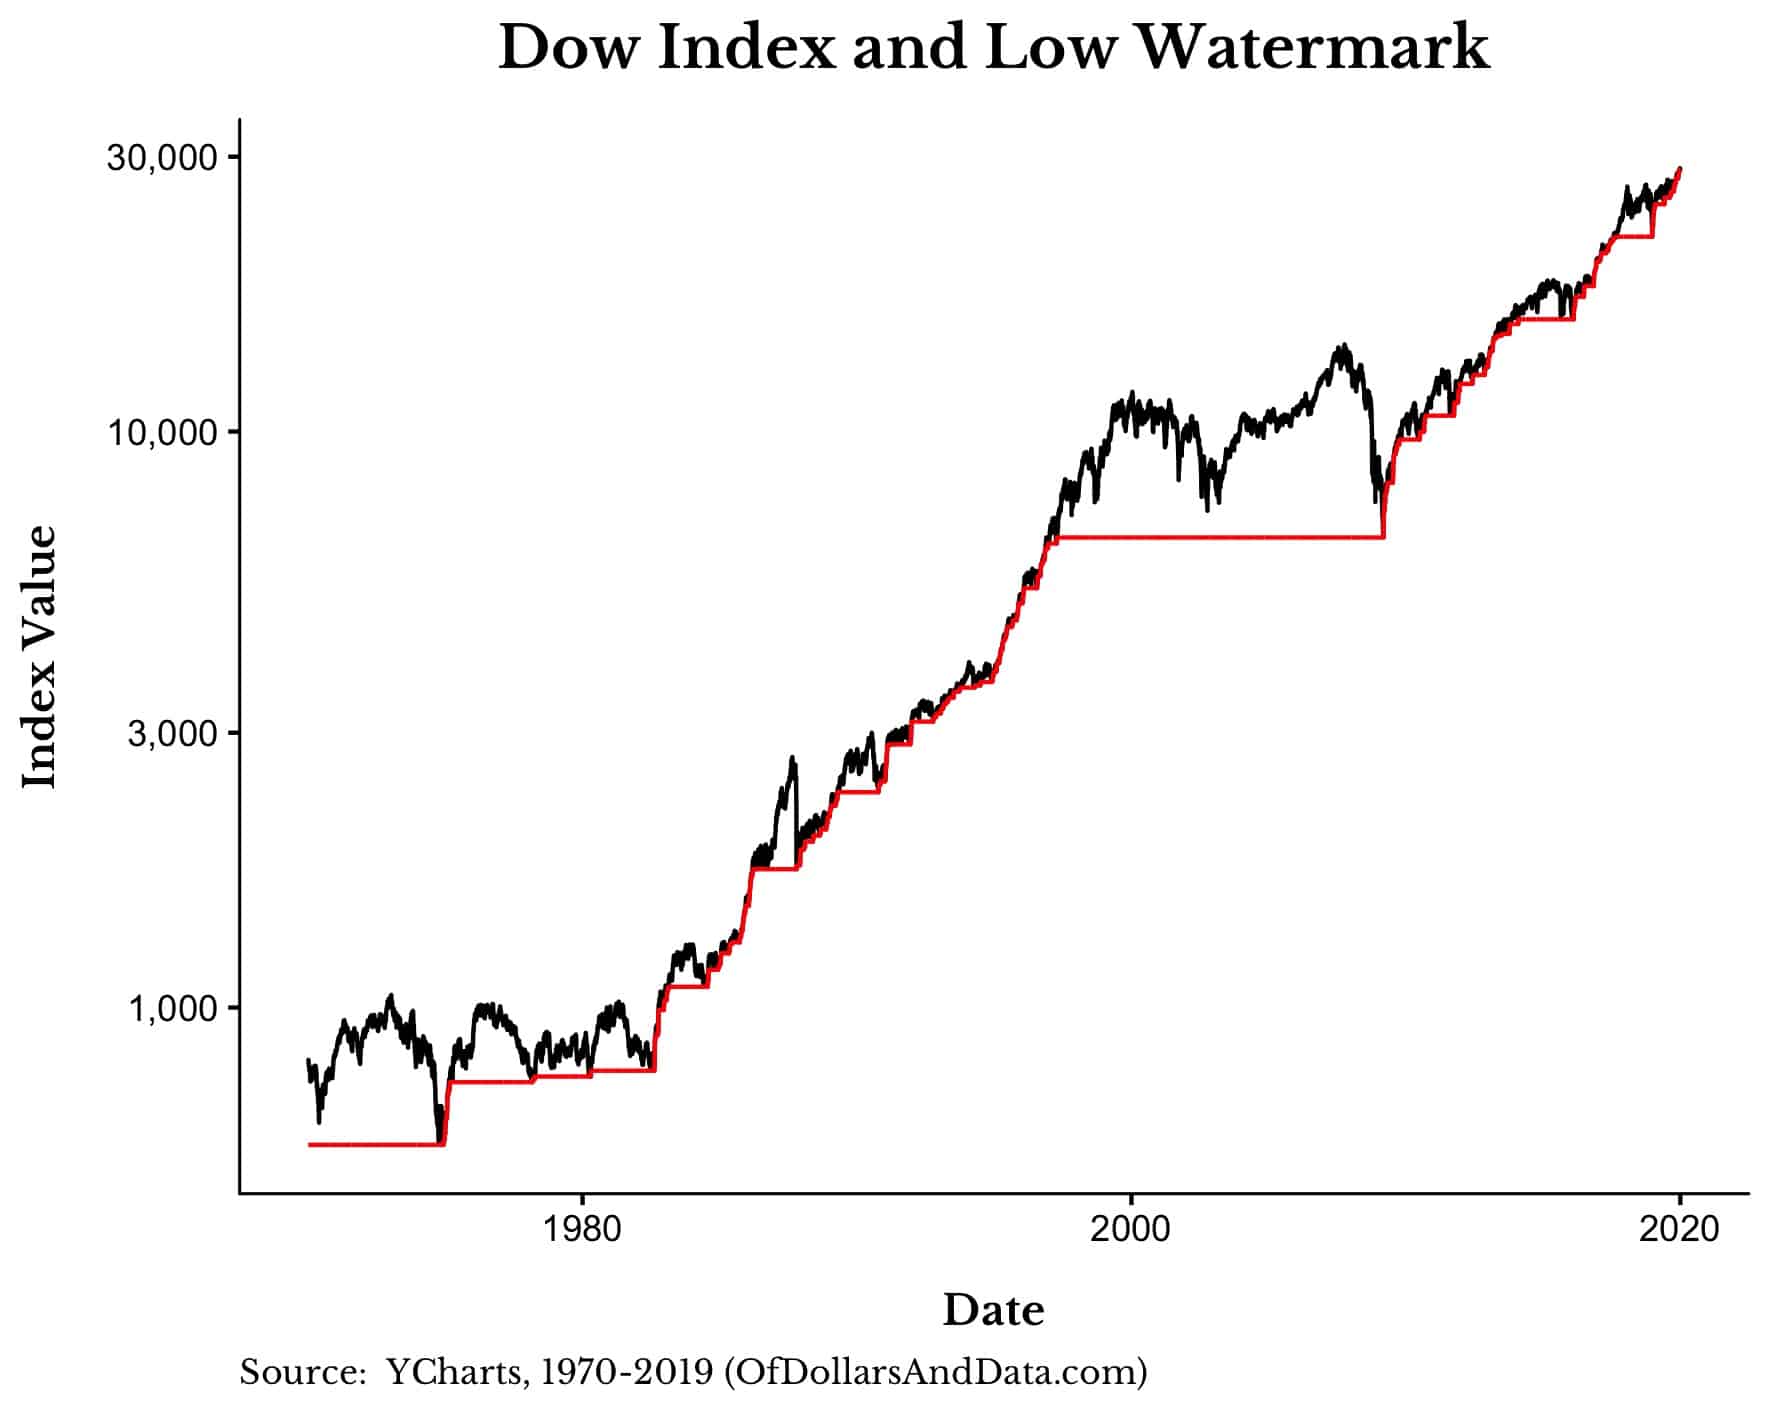 Dow Jones Industrial Average and its low watermark from 1970-2019.